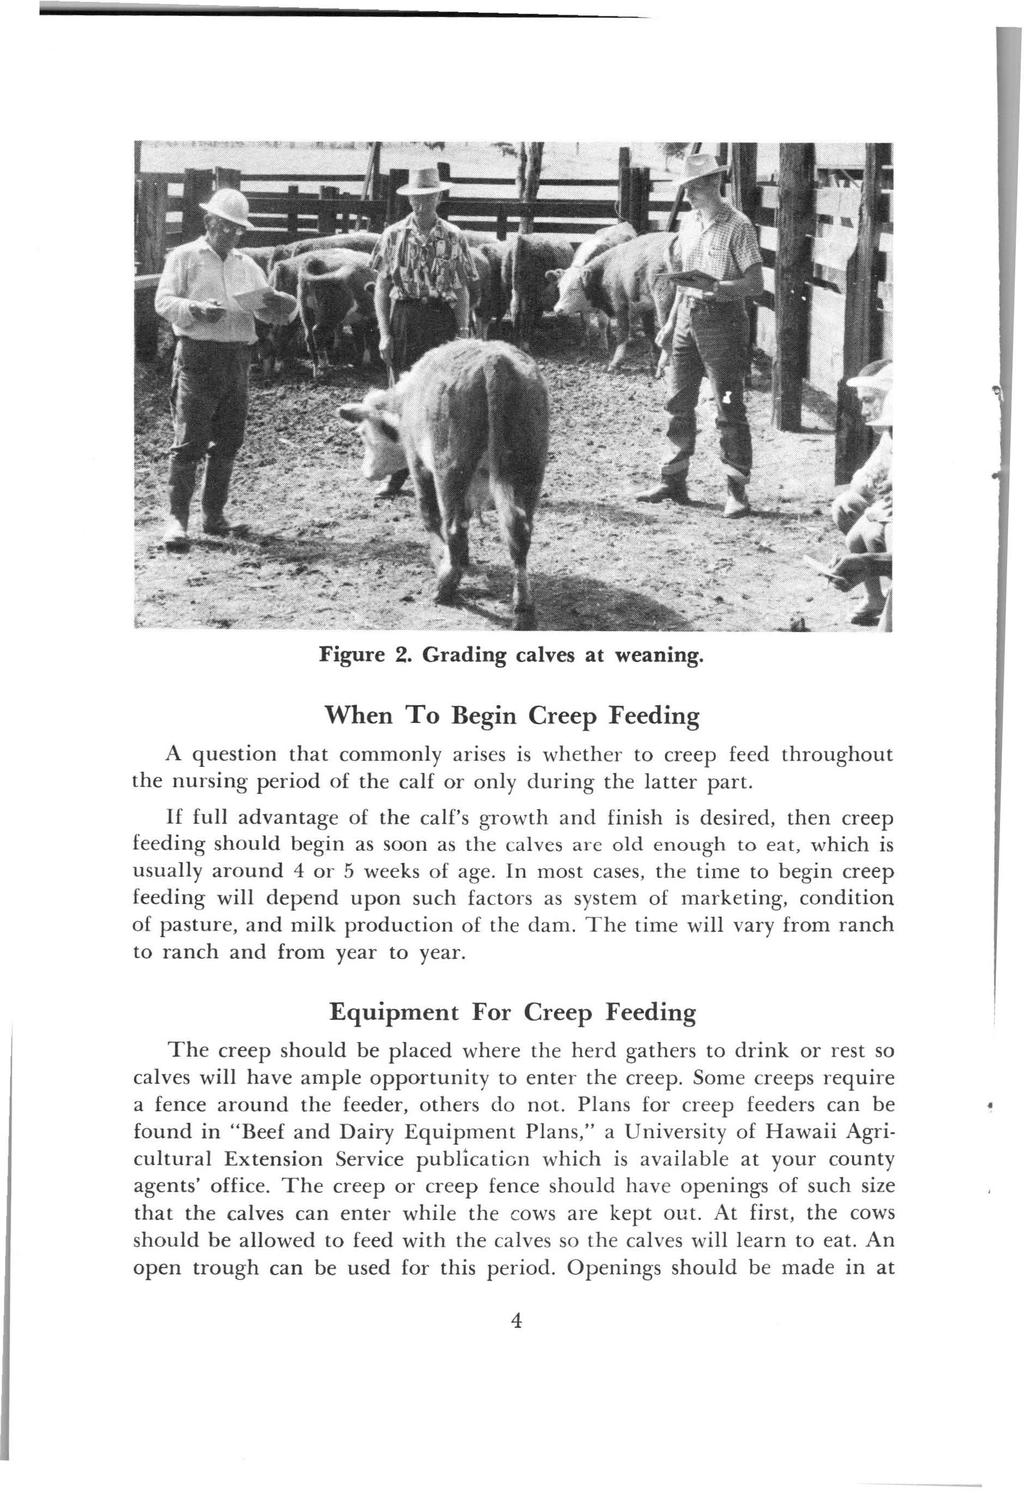 Figure 2. Grading calves at weaning. When To Begin Creep Feeding A question that commonly arises is whether to creep feed throughout the nursing period of the calf or only during the latter part.